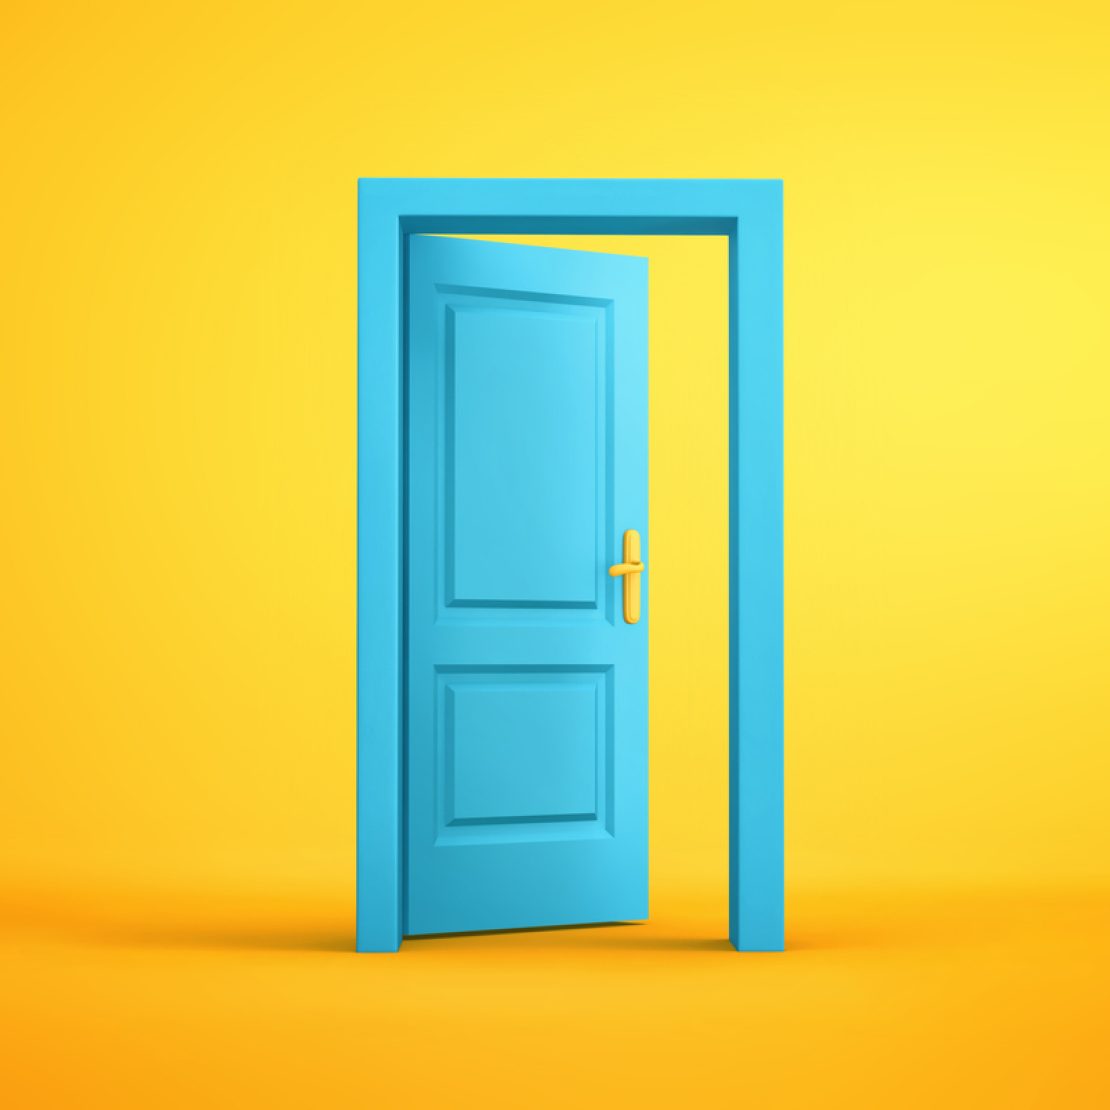 Teal door opening away from the viewer in a yellow nondimensional space